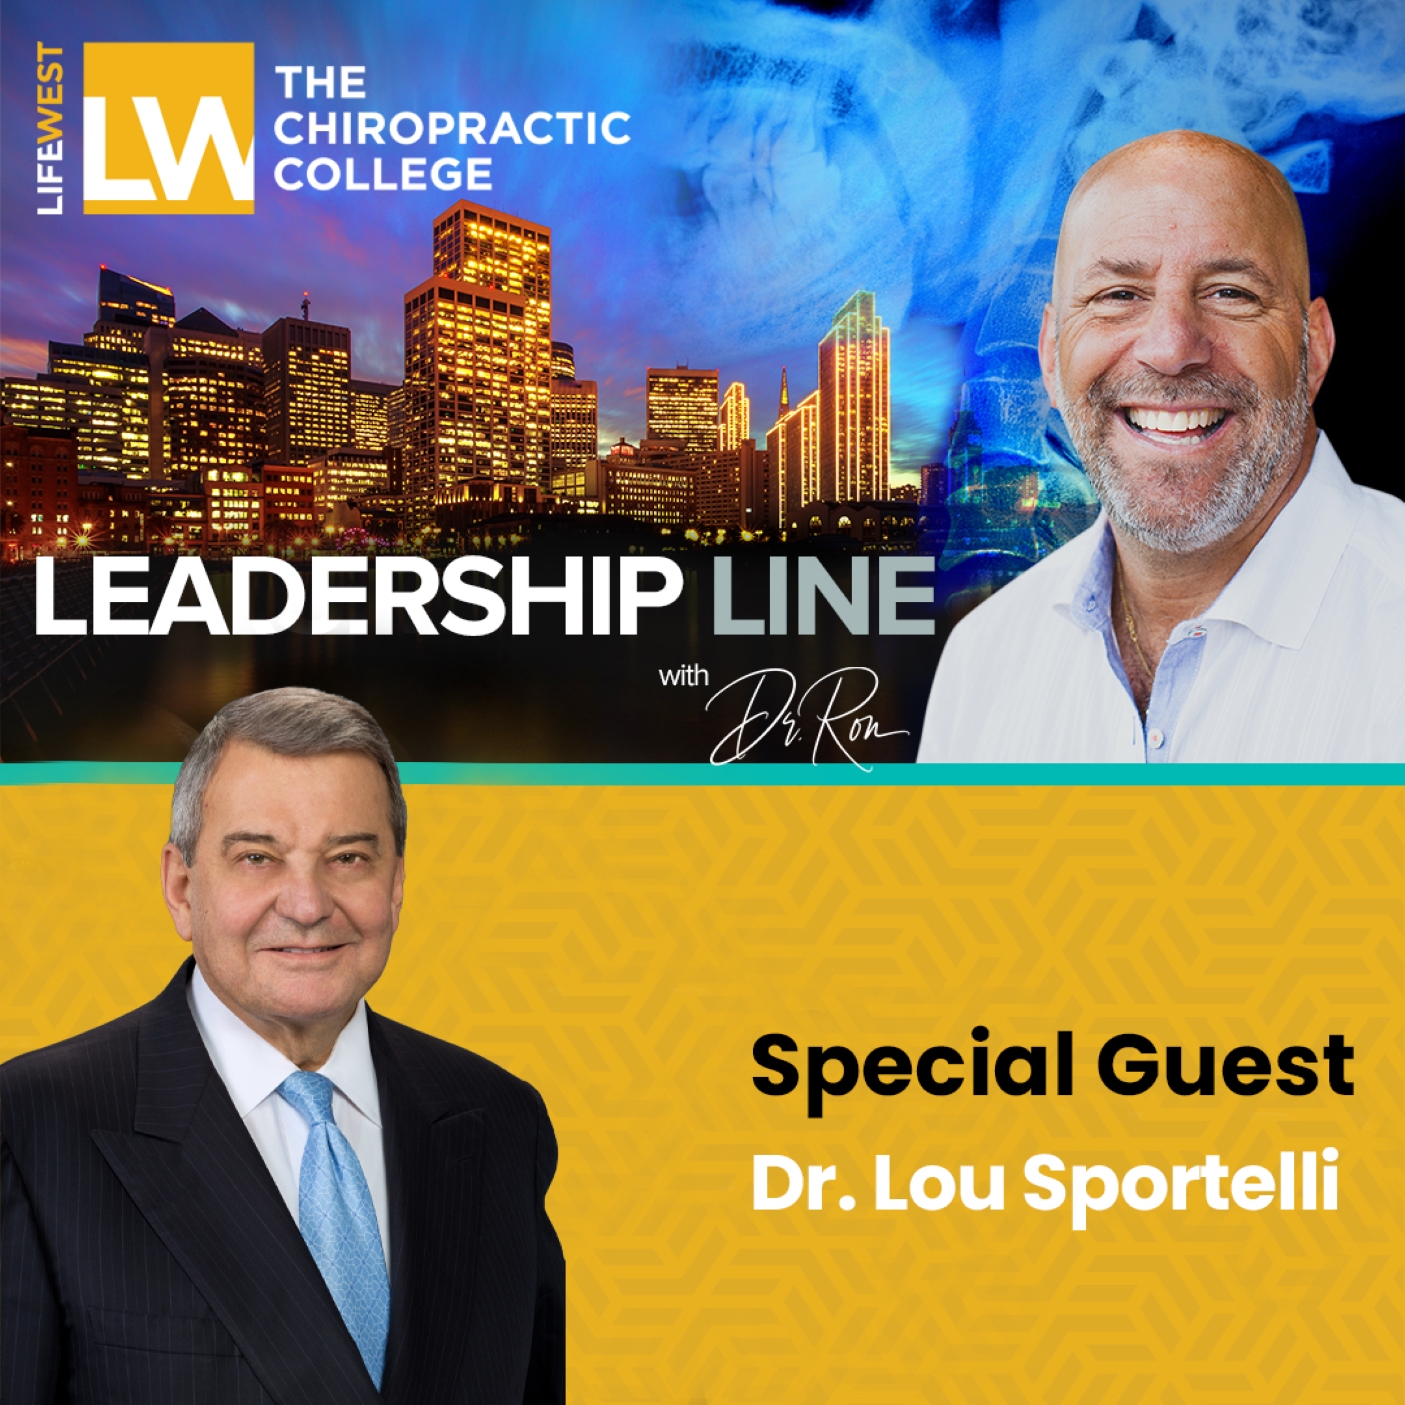 S4 Ep13 Dr. Lou Sportelli: A Lifetime Champion for Chiropractic